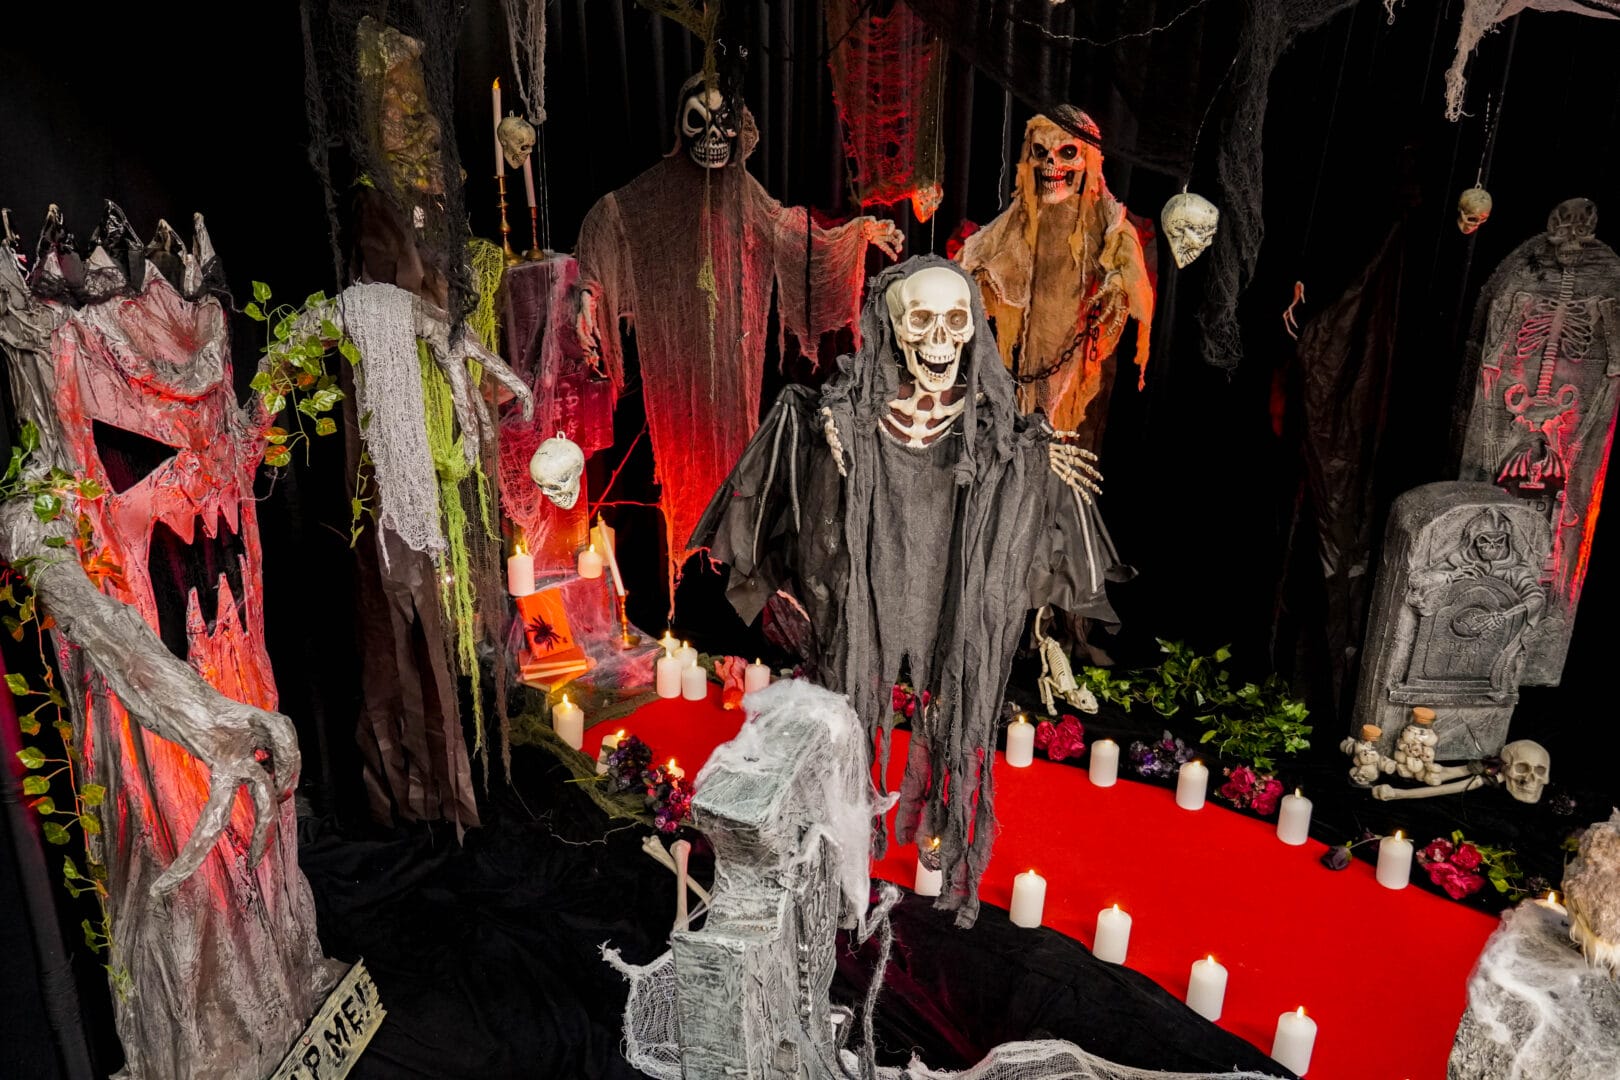 themed halloween hanging props. red carpet, candles